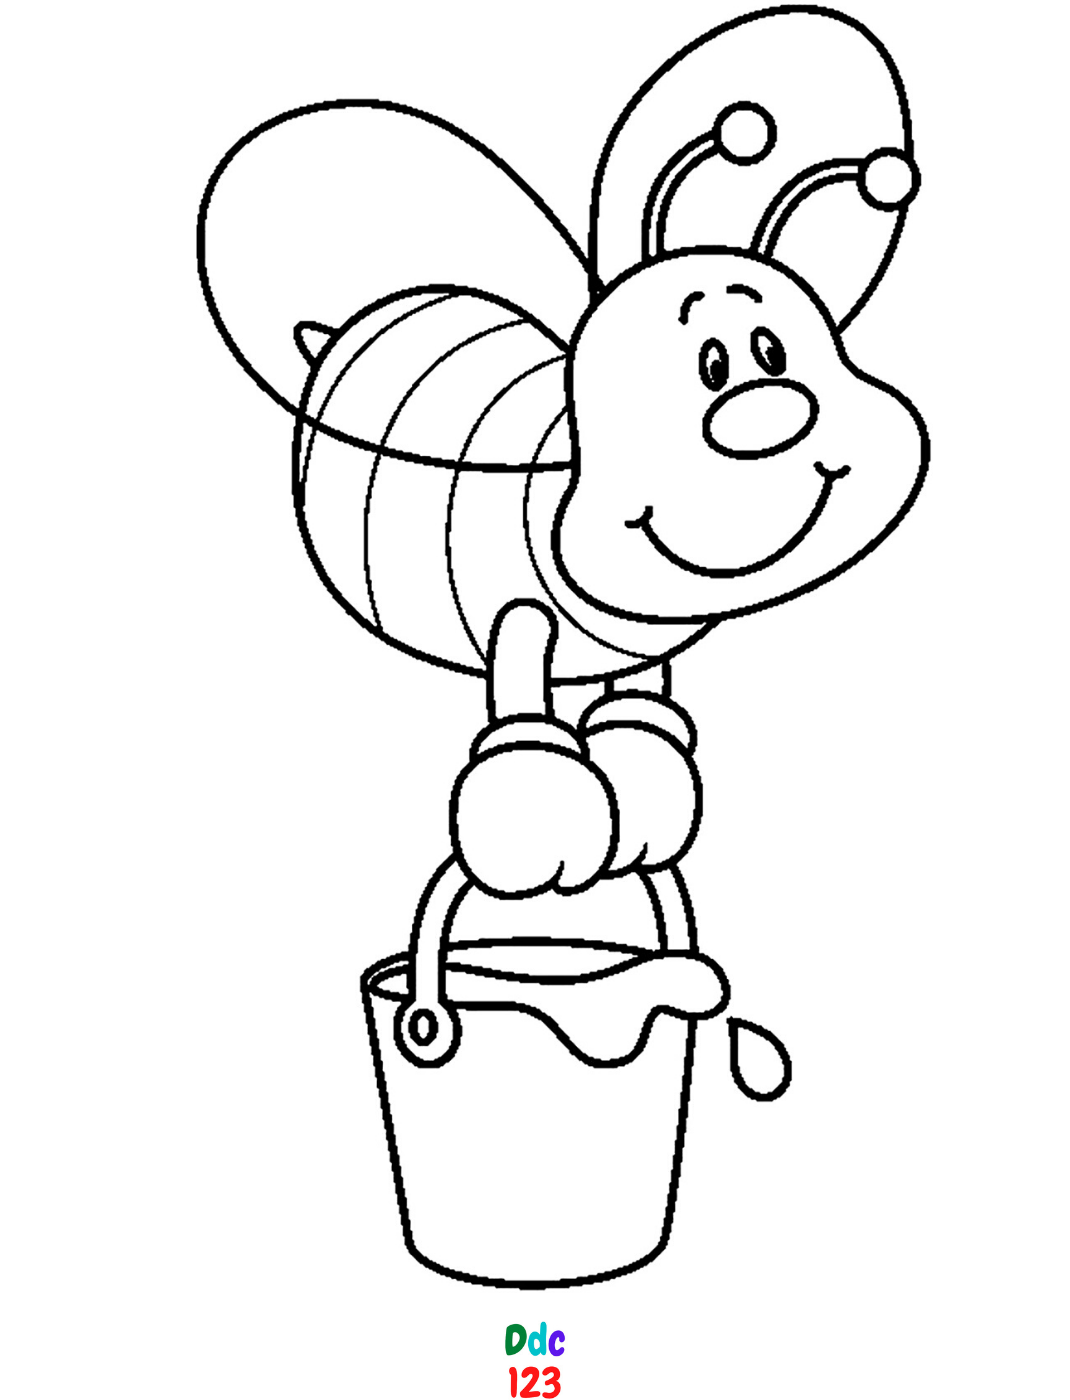 Bee Coloring Pages for kids - DDC123